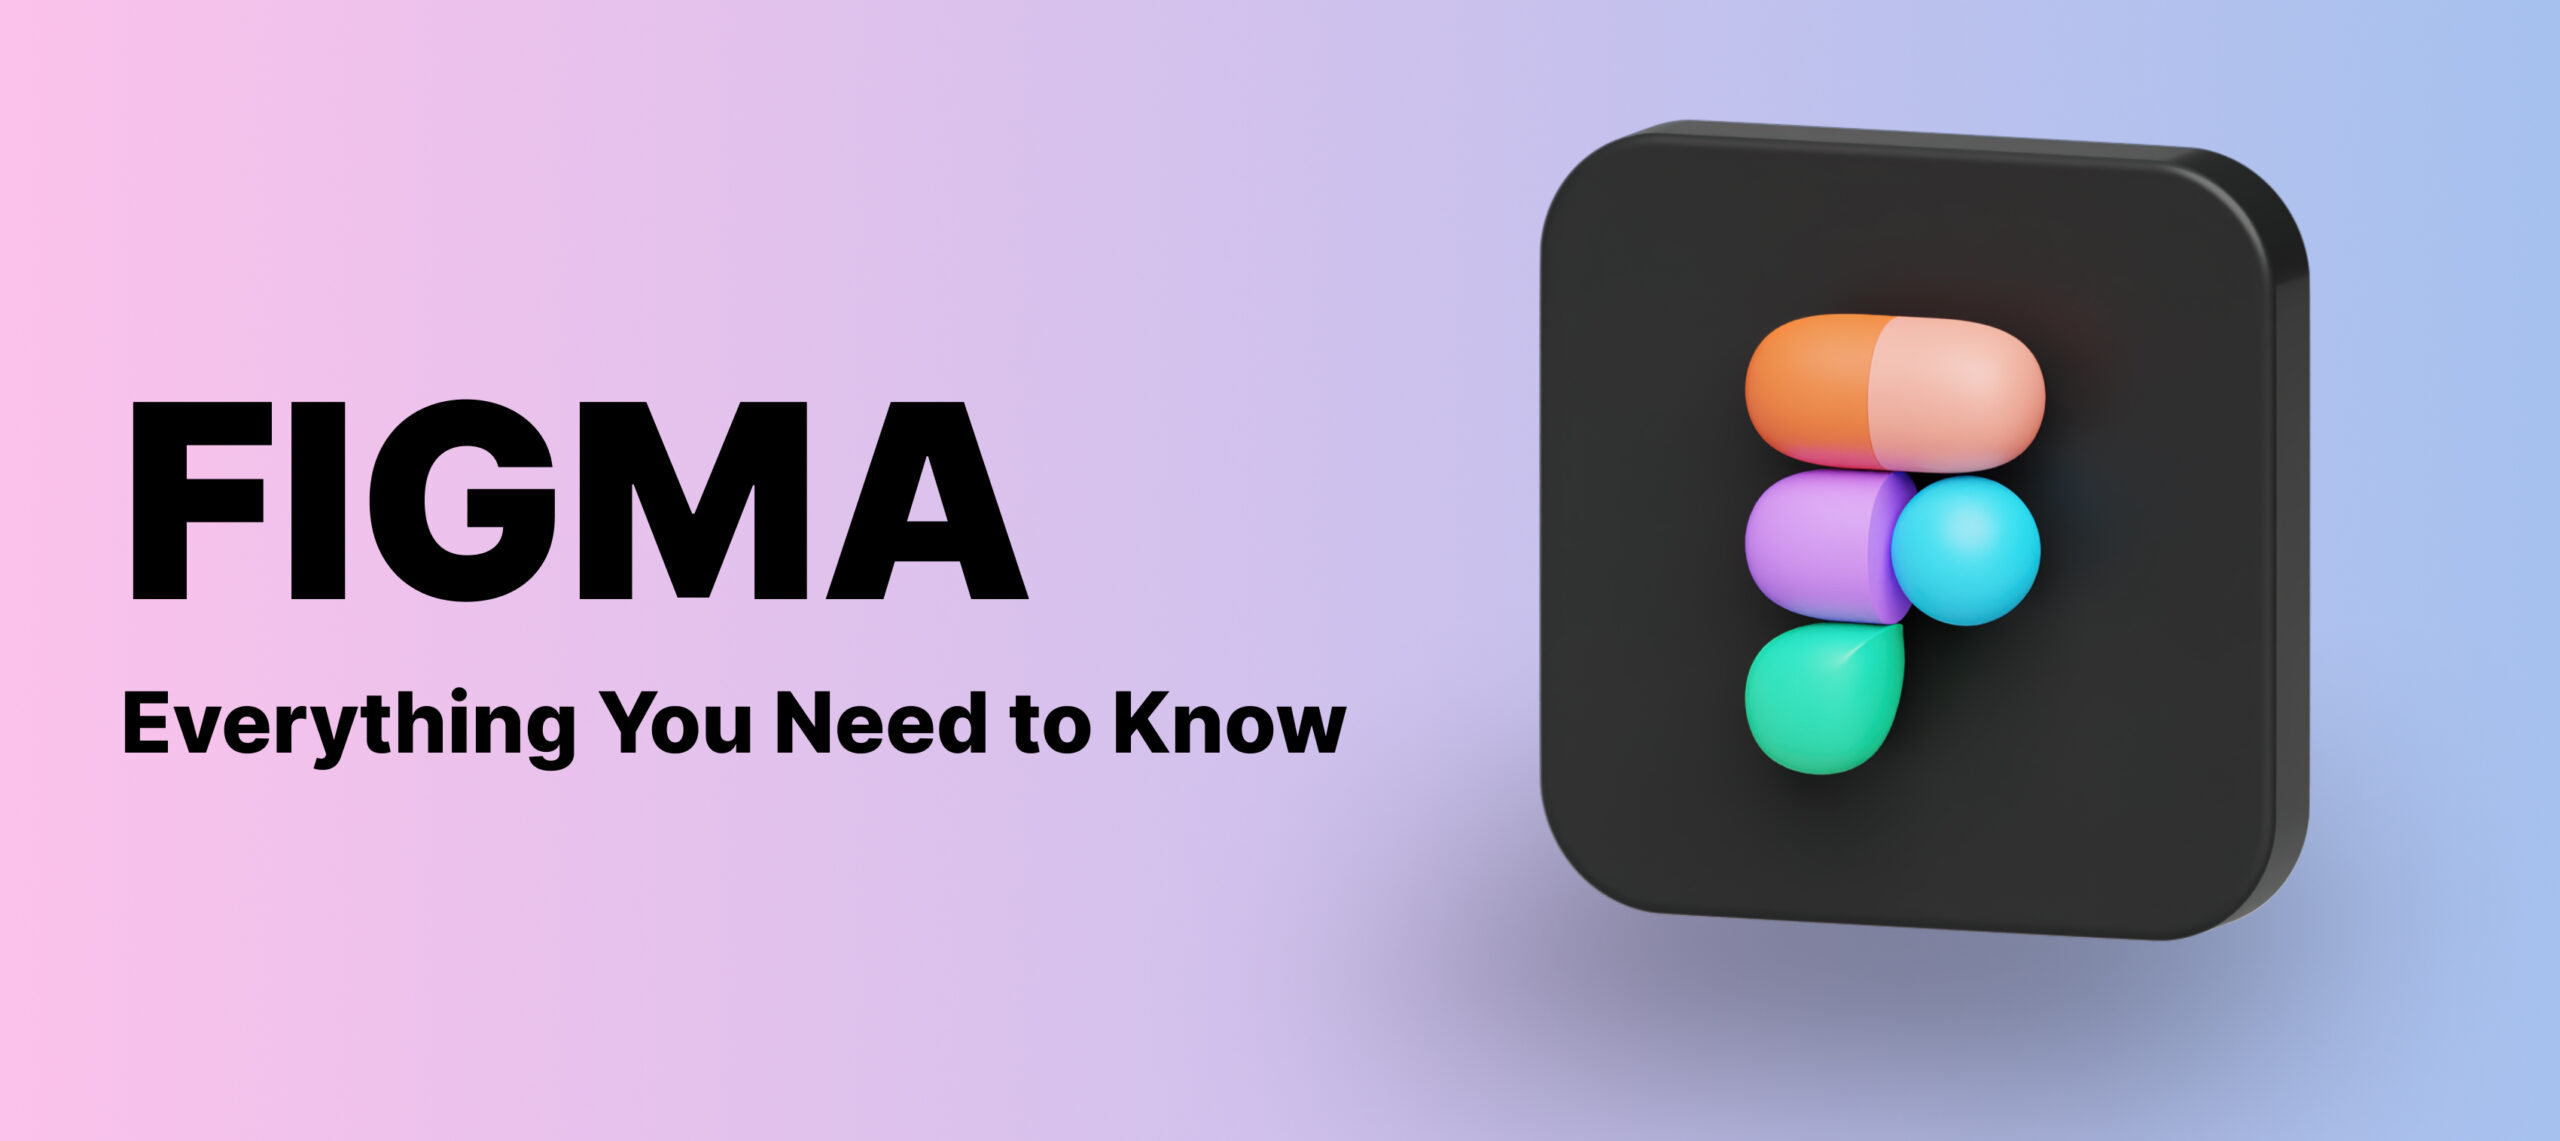  Figma; Everything You Need to Know